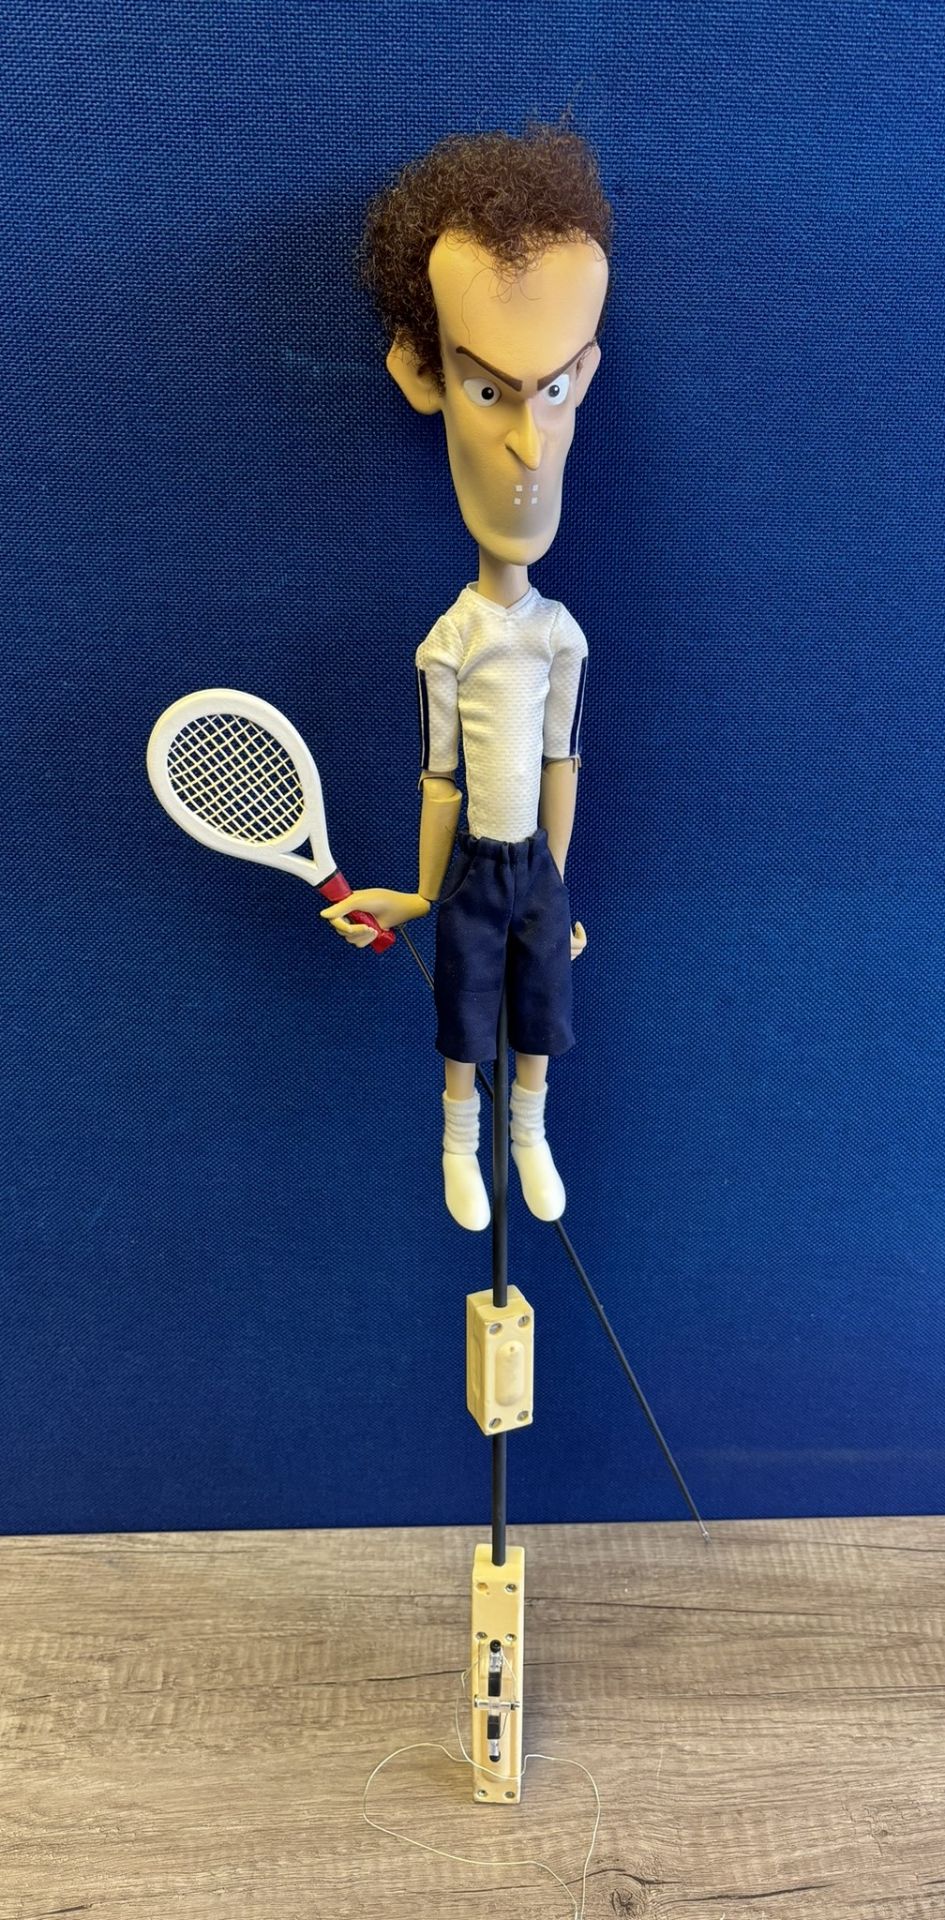 Newzoid puppet - Andy Murray - Image 3 of 3